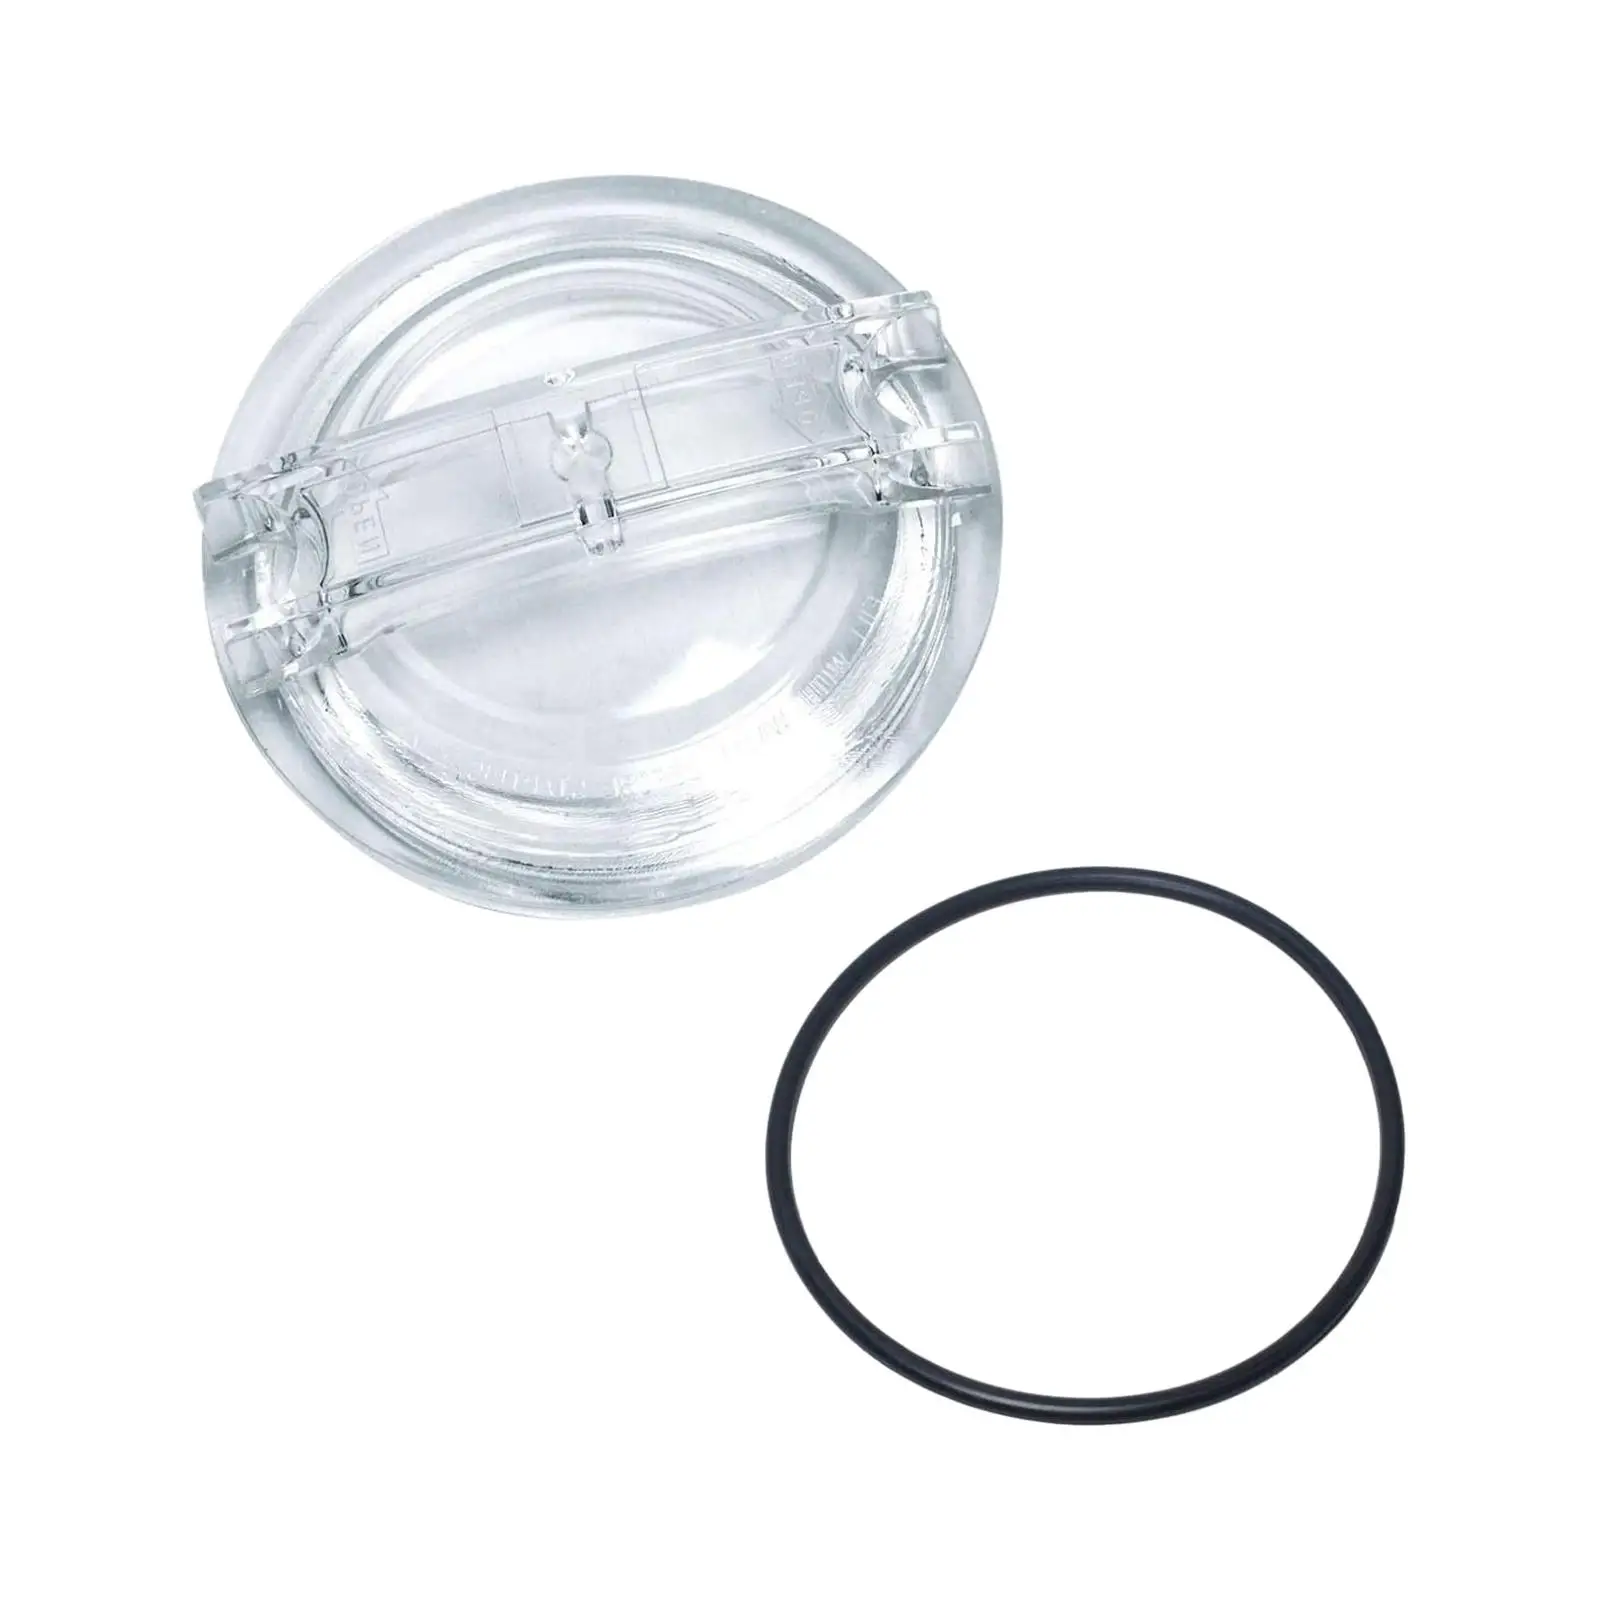 Pool Pump Lid Threaded Strainer Lid Cover, 5.24`` Acrylic Replacement Swimming